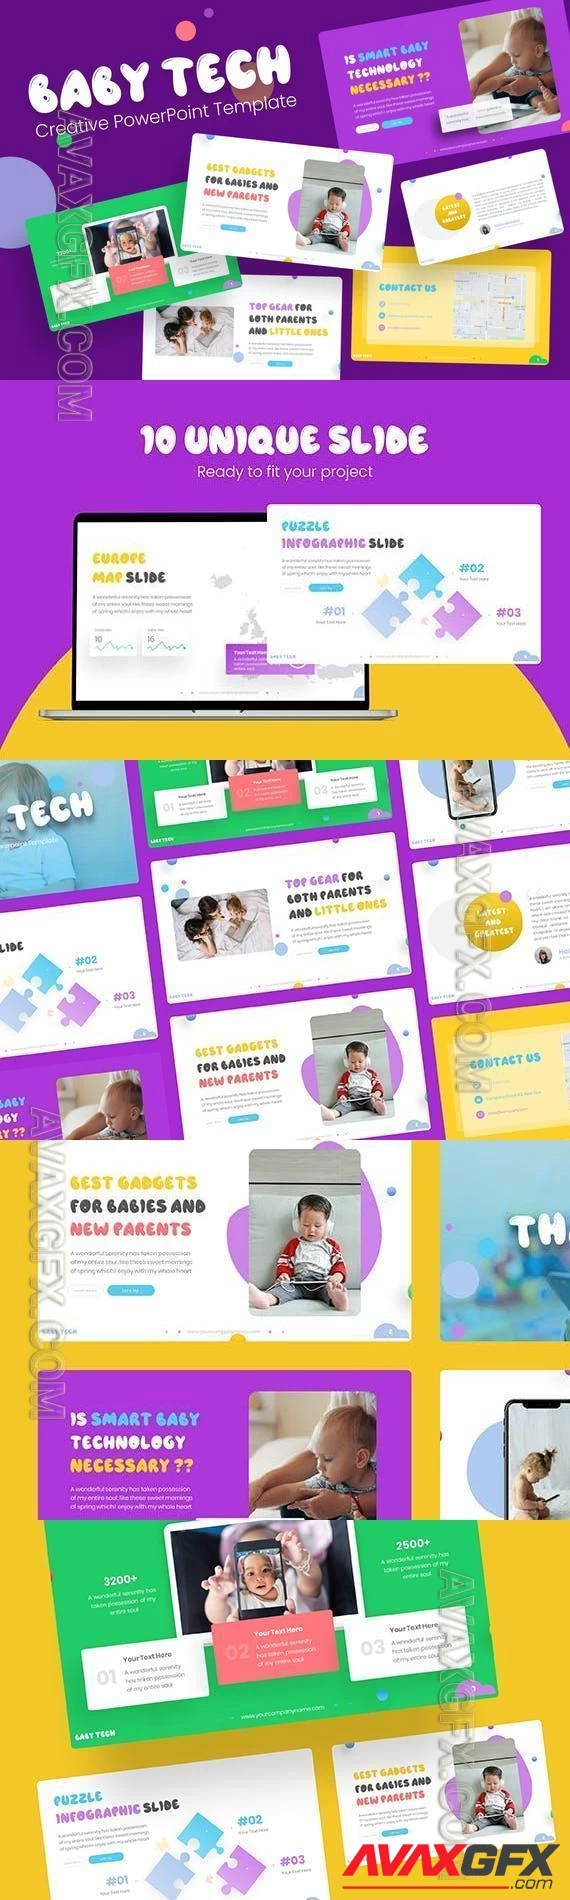 Baby Tech Powerpoint Template